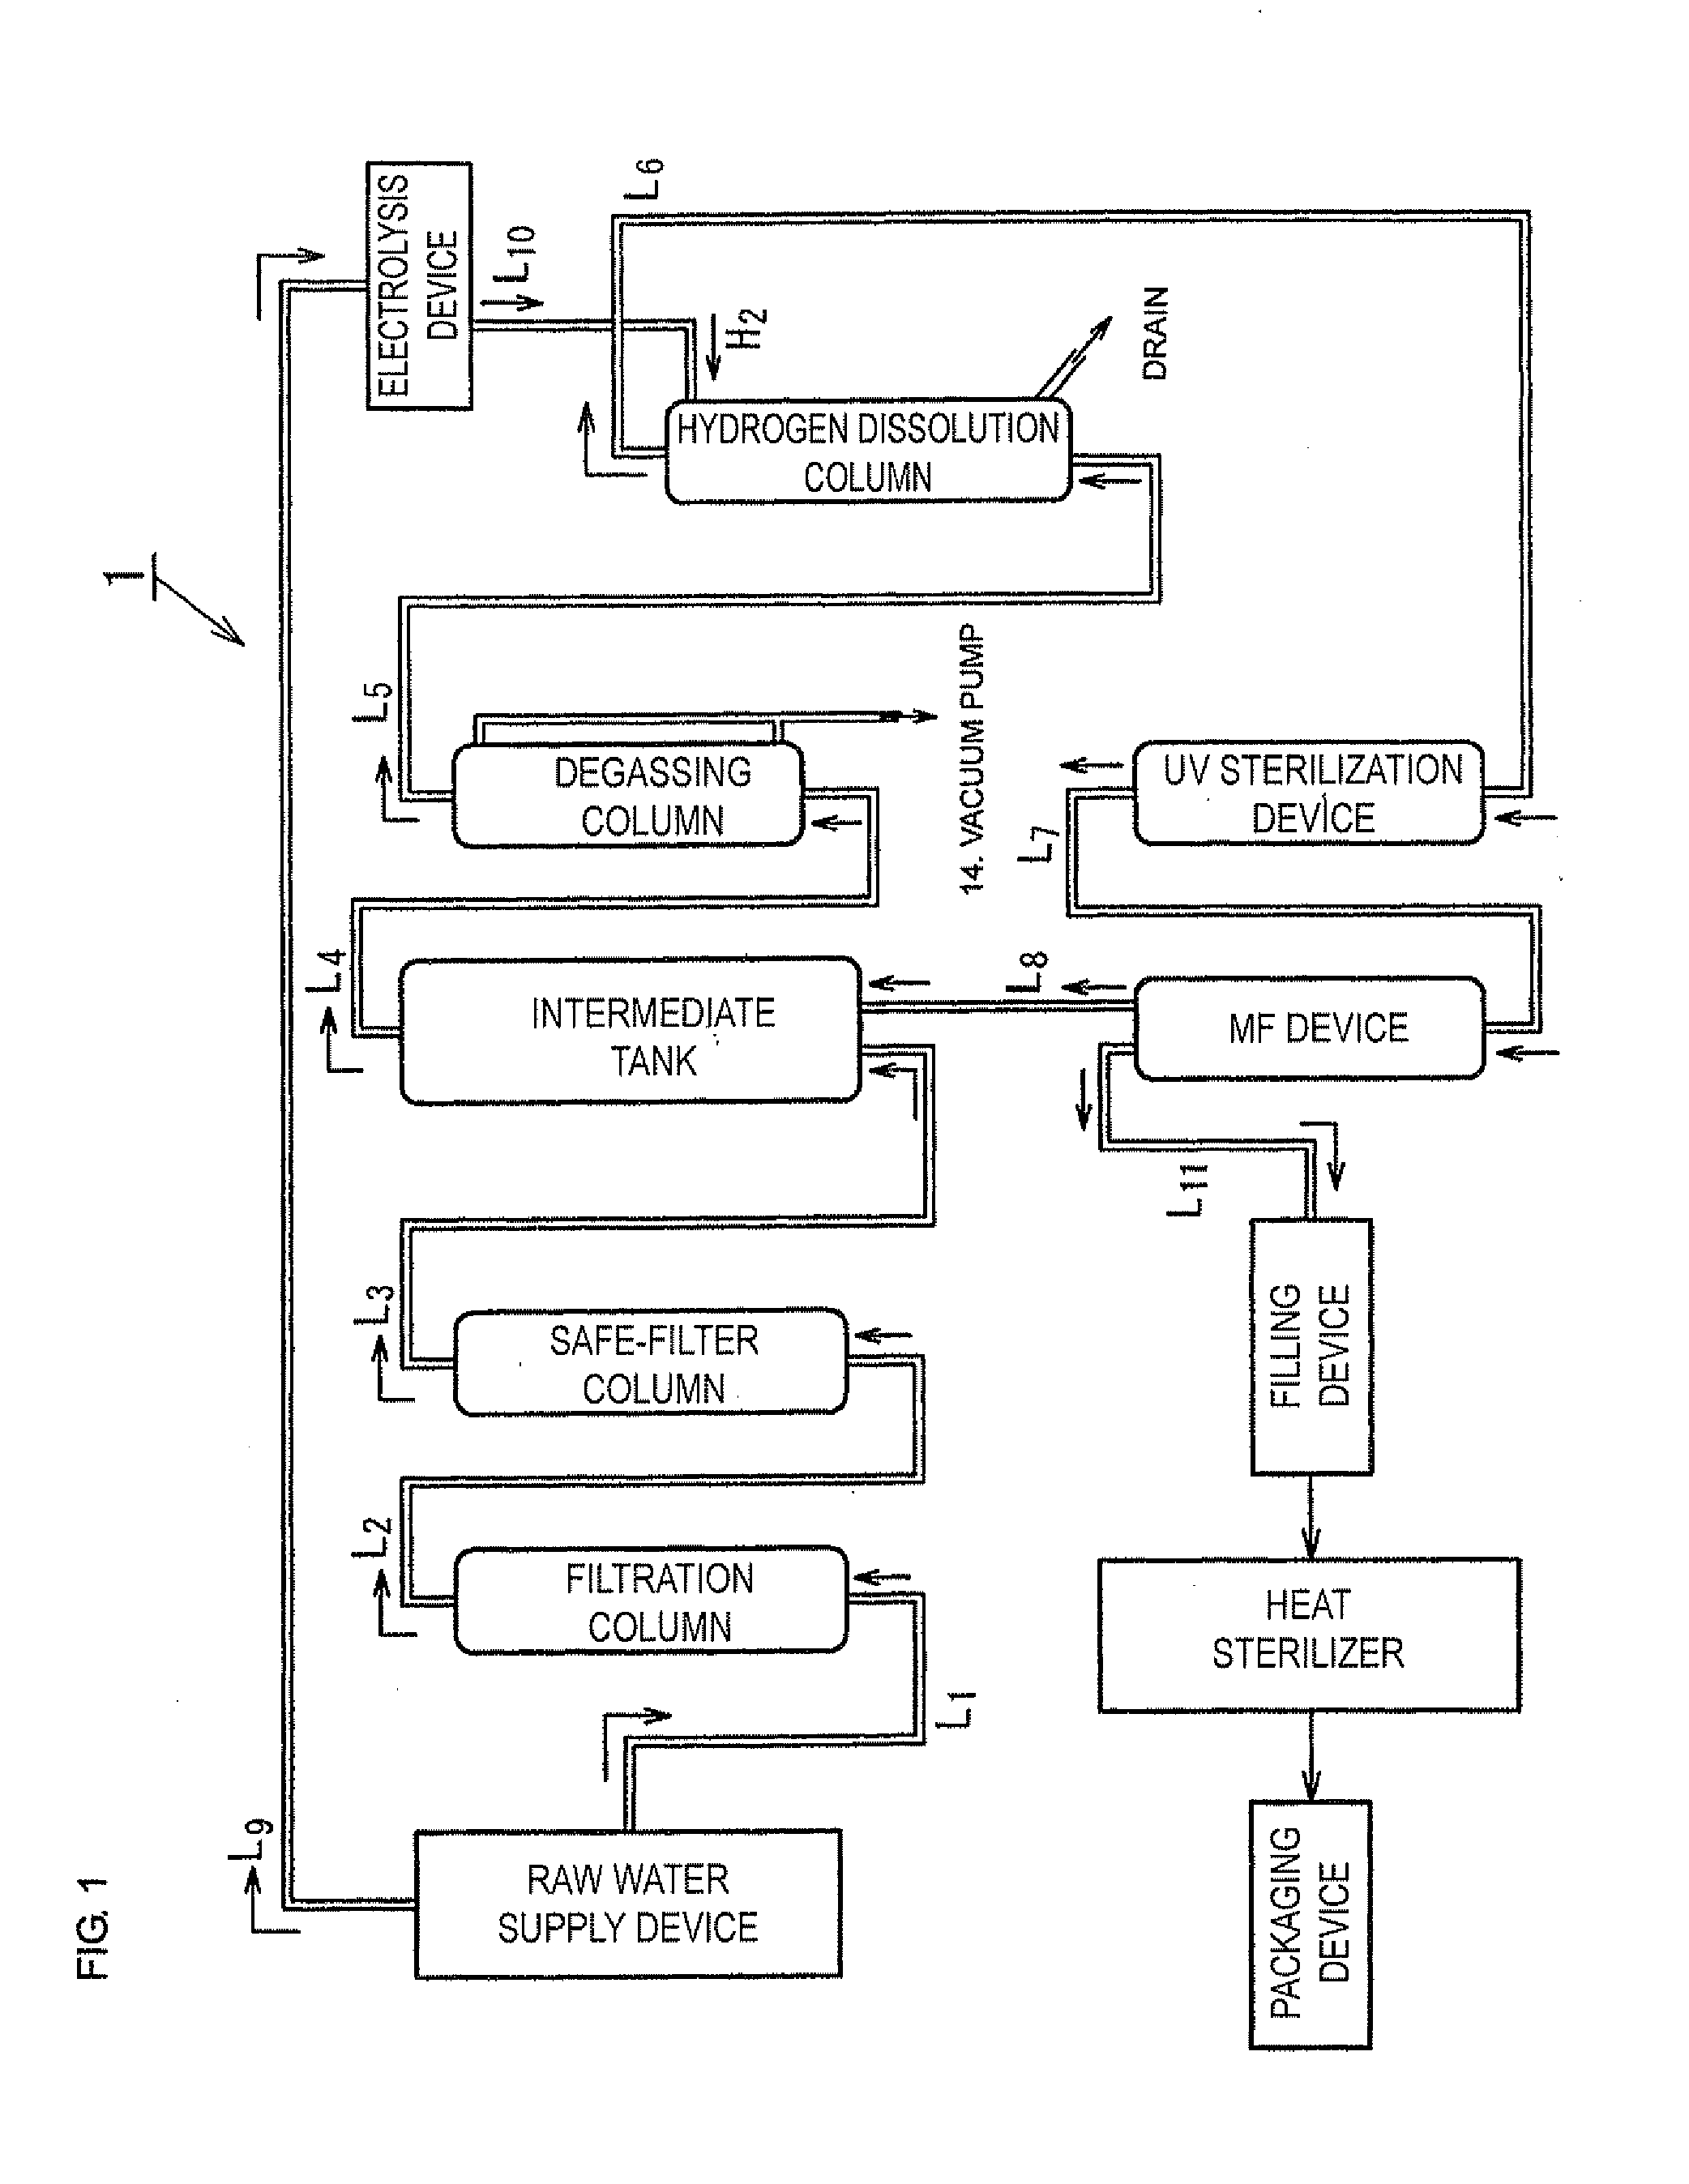 Process for producing hydrogen-containing water for drinking